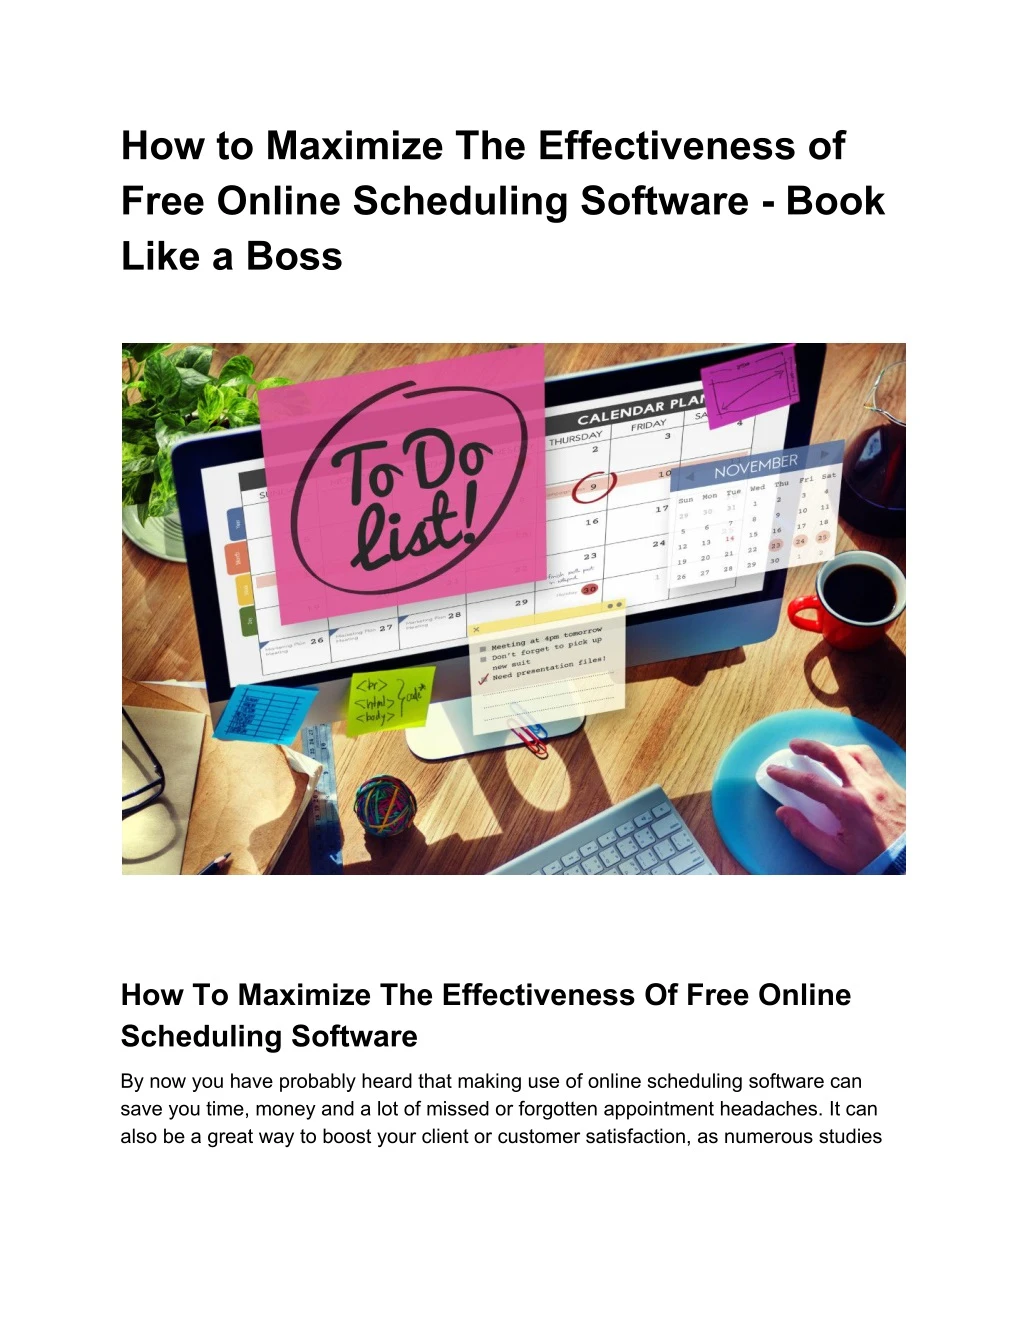 how to maximize the effectiveness of free online